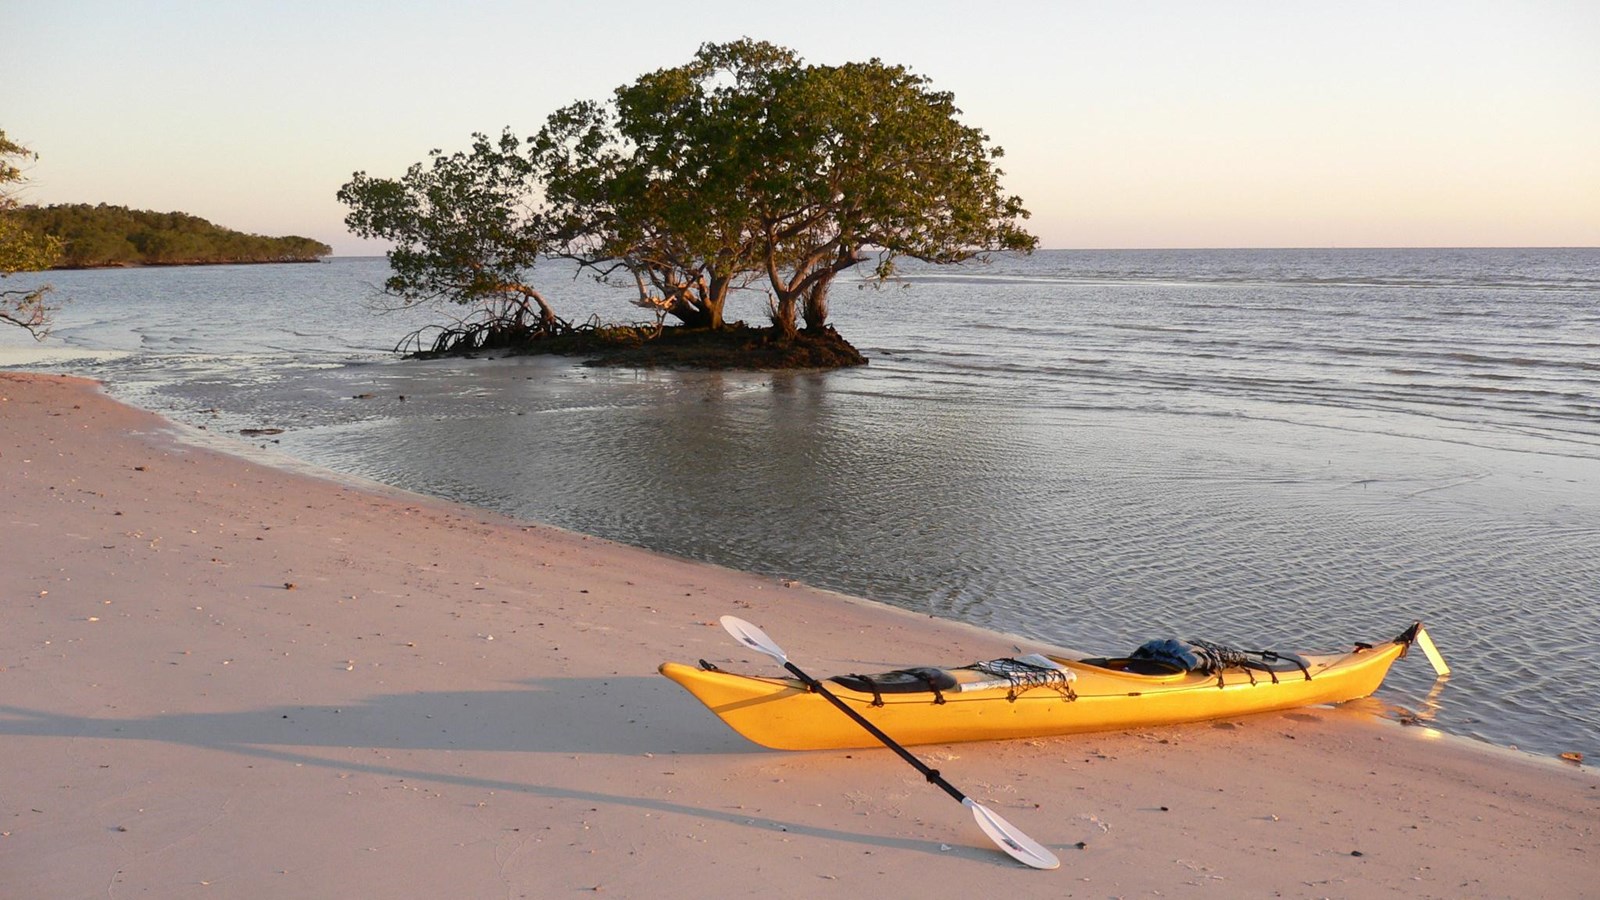 A yellow kayak sits on pink/white sand with calm waters. Green Mangrove trees emerge from water